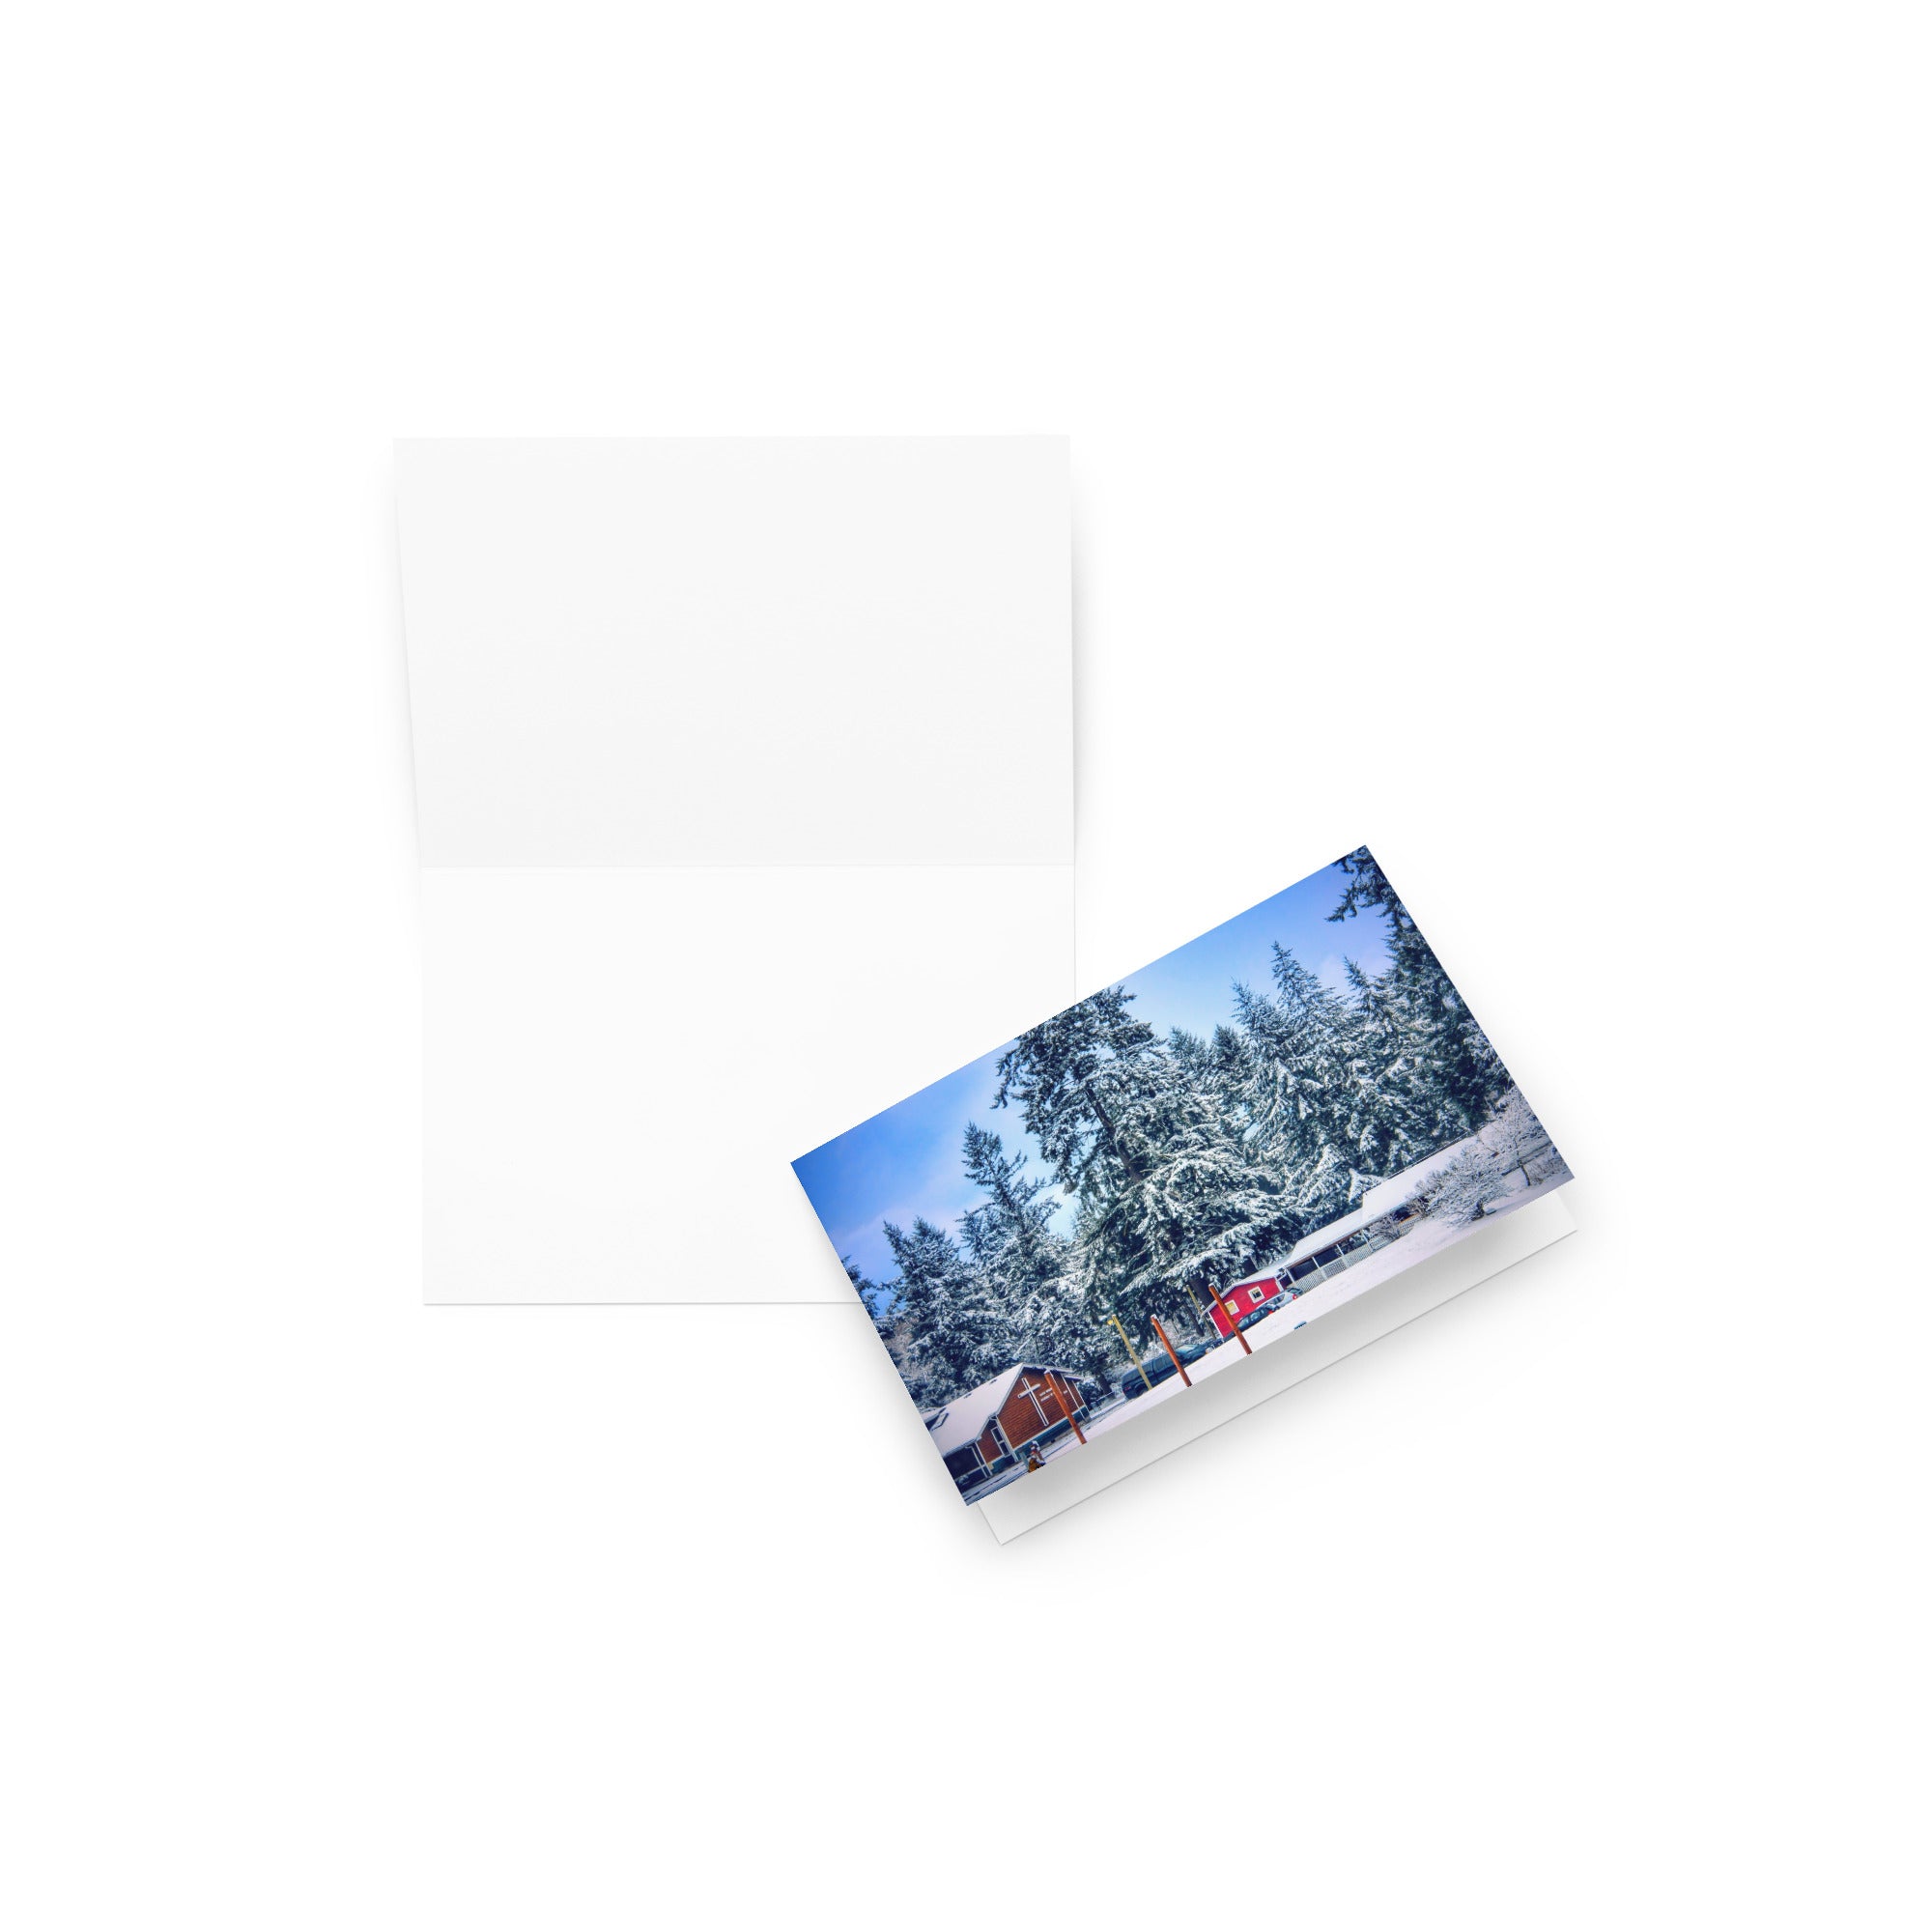 Snowy Christmas Whidbey Island Photograph Greeting card